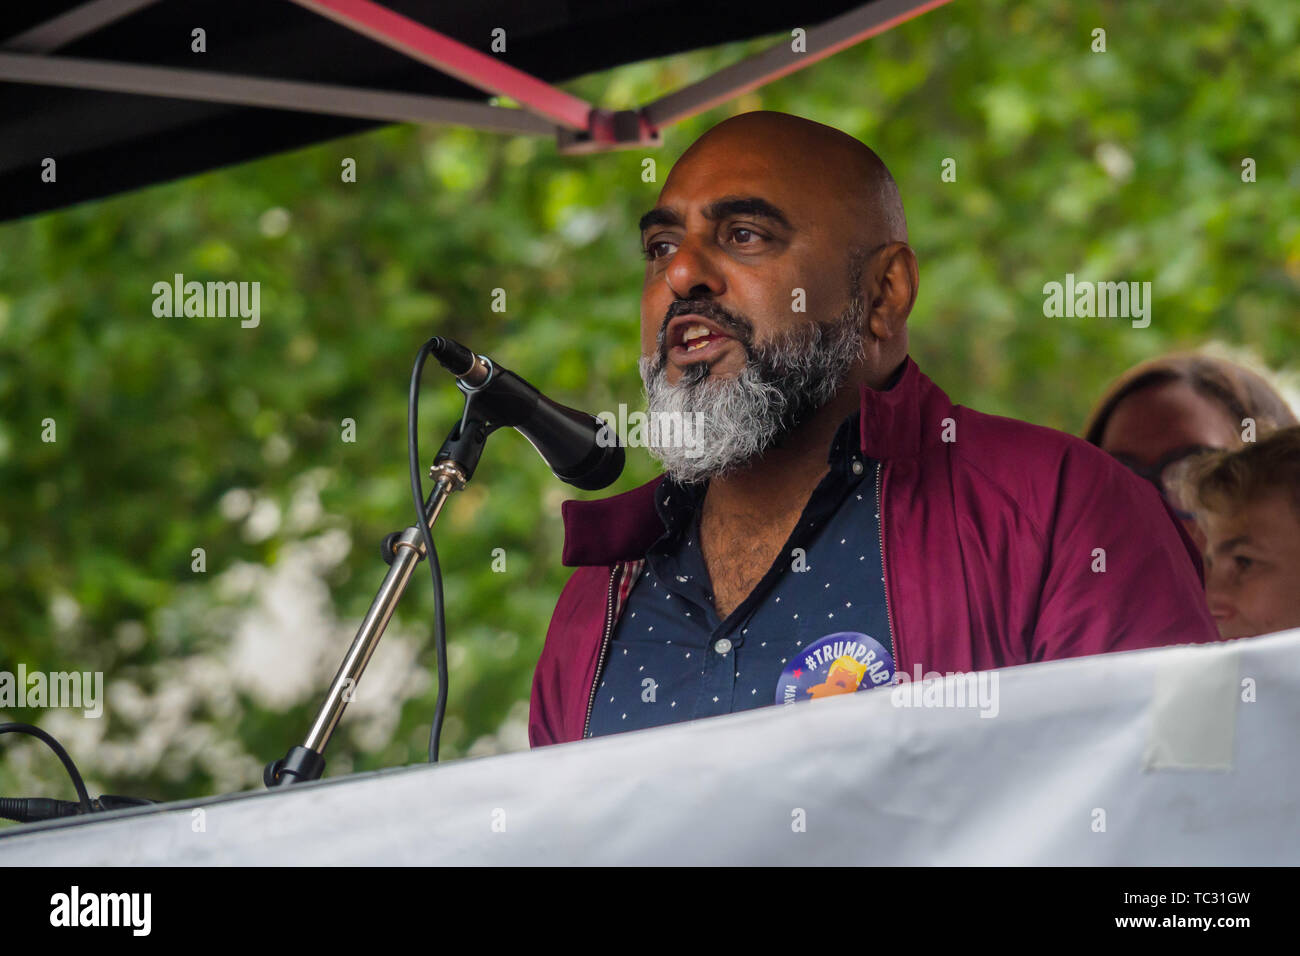 London, UK. 4th June 2019. Asad Rehman of Global Justice Now speaking at the Whitehall rally to send a clear message that President Trump is not welcome here because of his climate denial, racism, Islamophobia, misogyny and bigotry. His policies of hate and division have energised the far right around the world. 4th June, 2019. Peter Marshall IMAGESLIVE Credit: Peter Marshall/IMAGESLIVE/ZUMA Wire/Alamy Live News Stock Photo